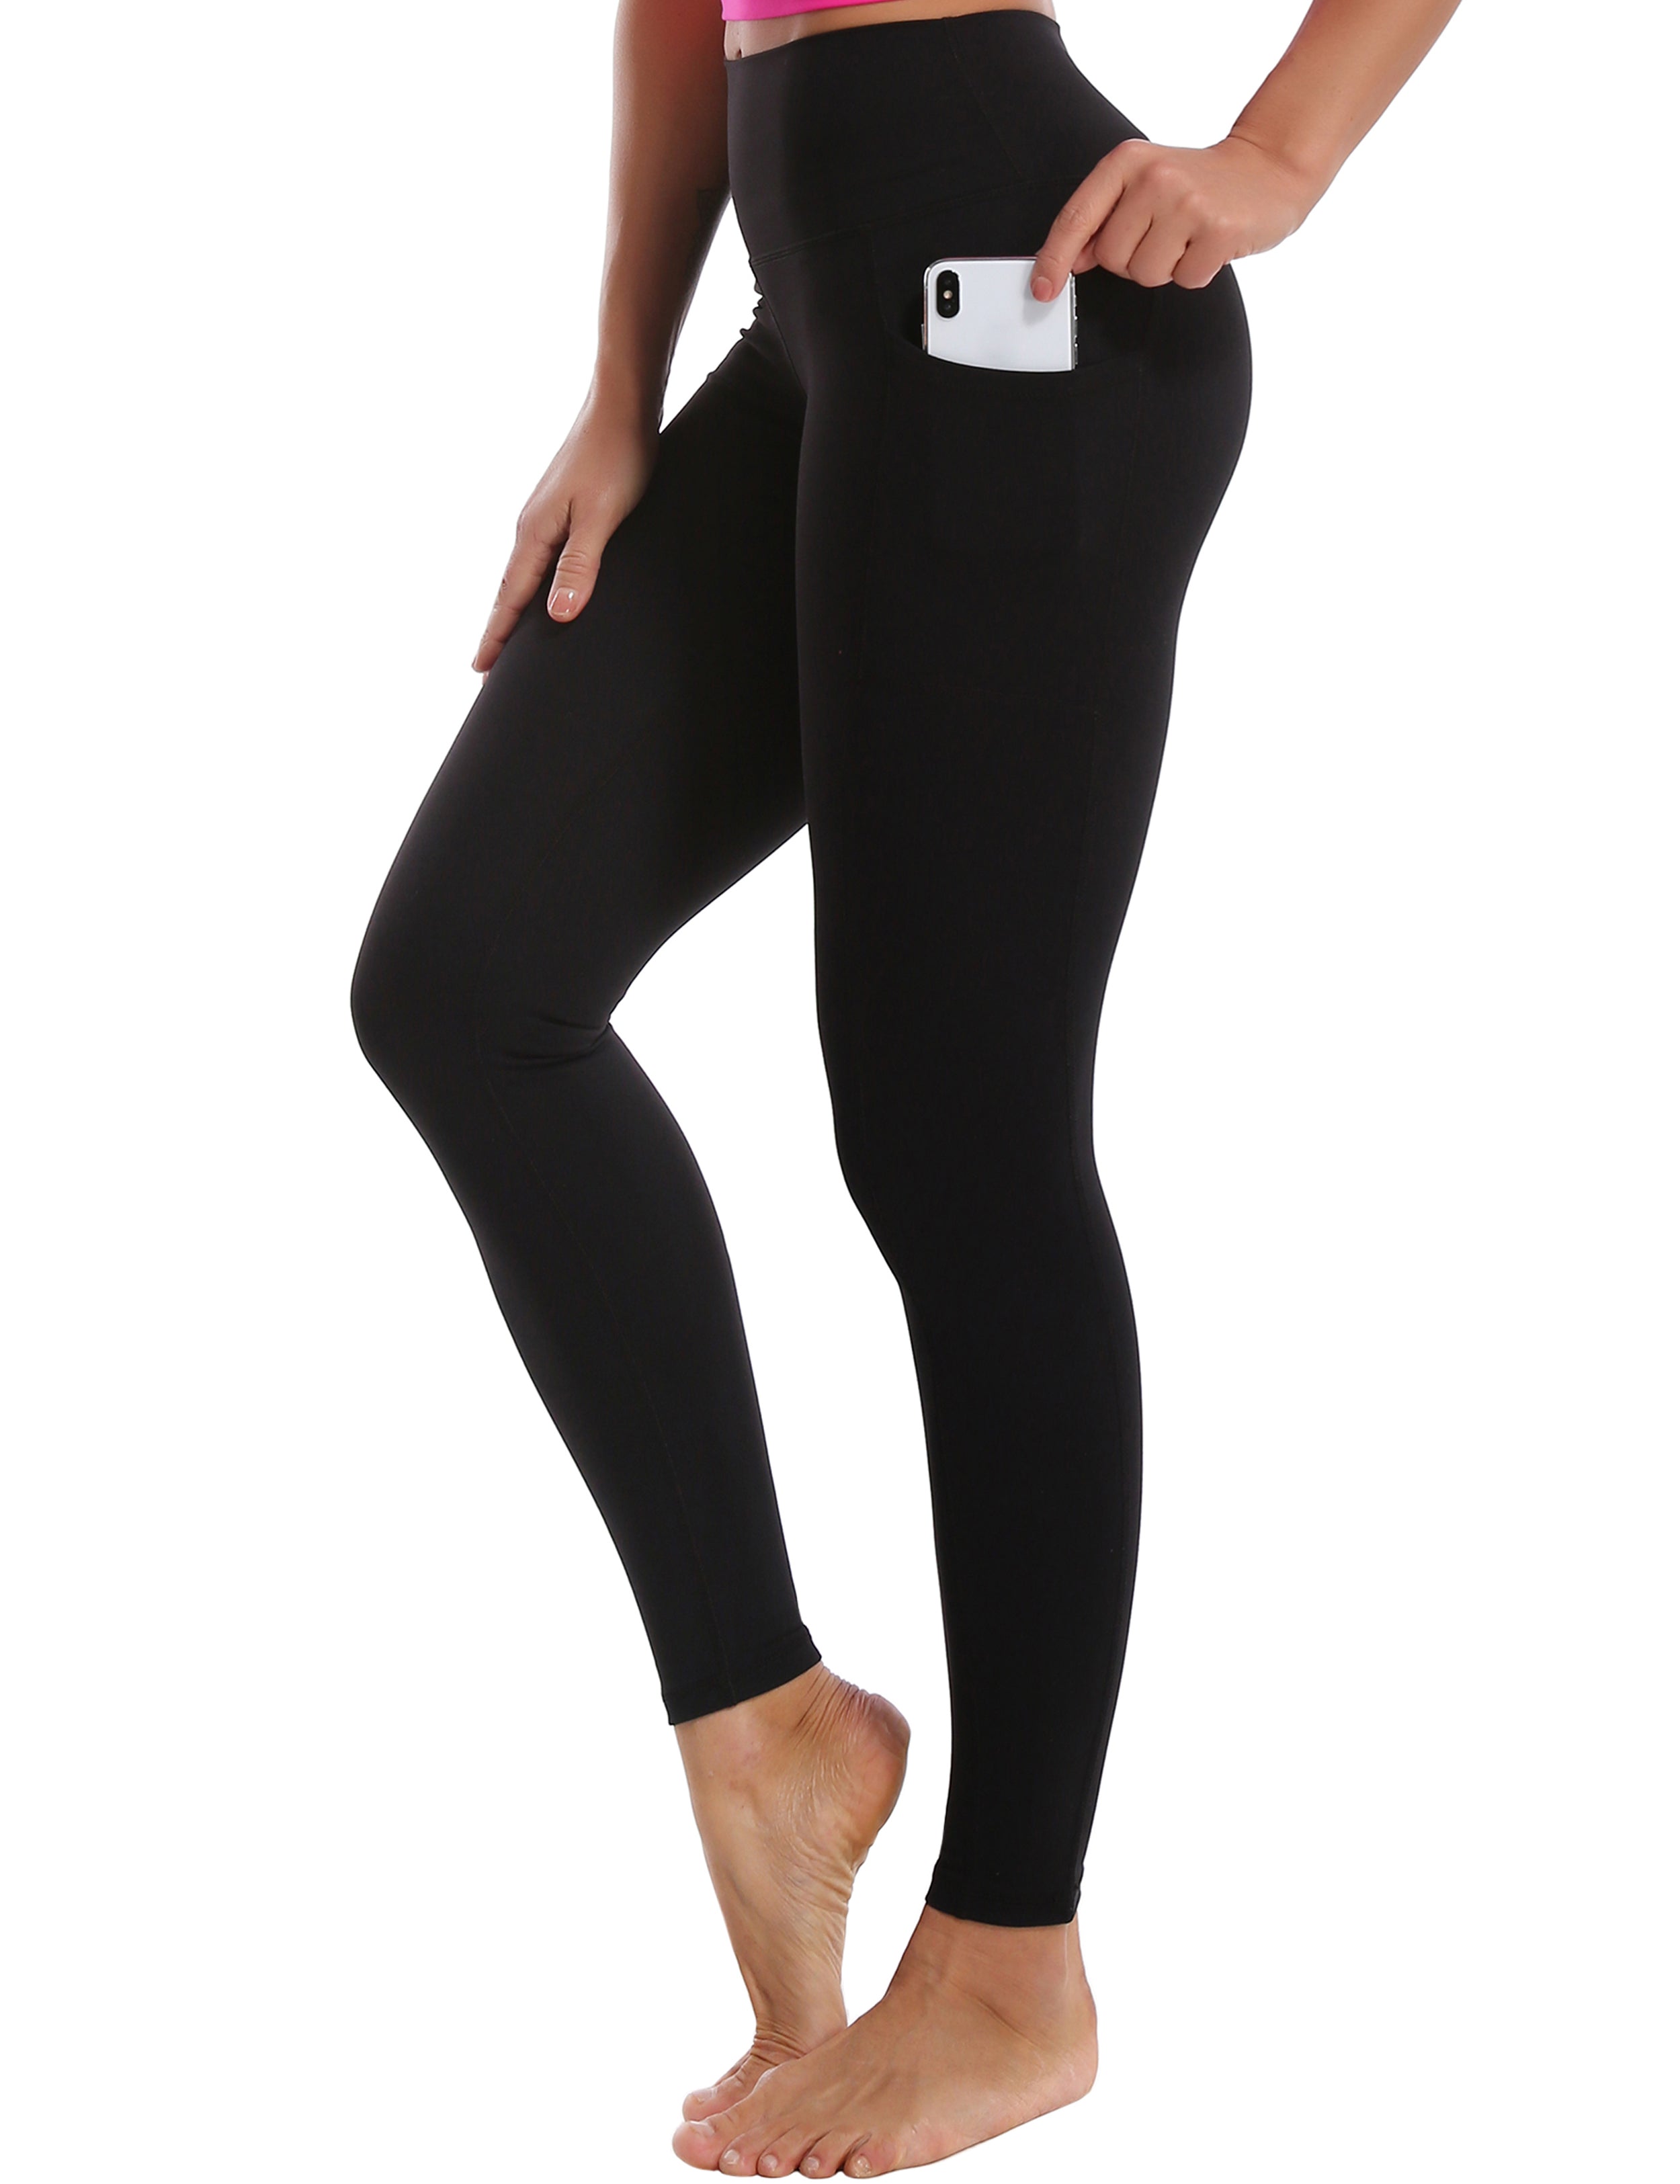 High Waisted Running Pants 7/8 Length Leggings with Pockets